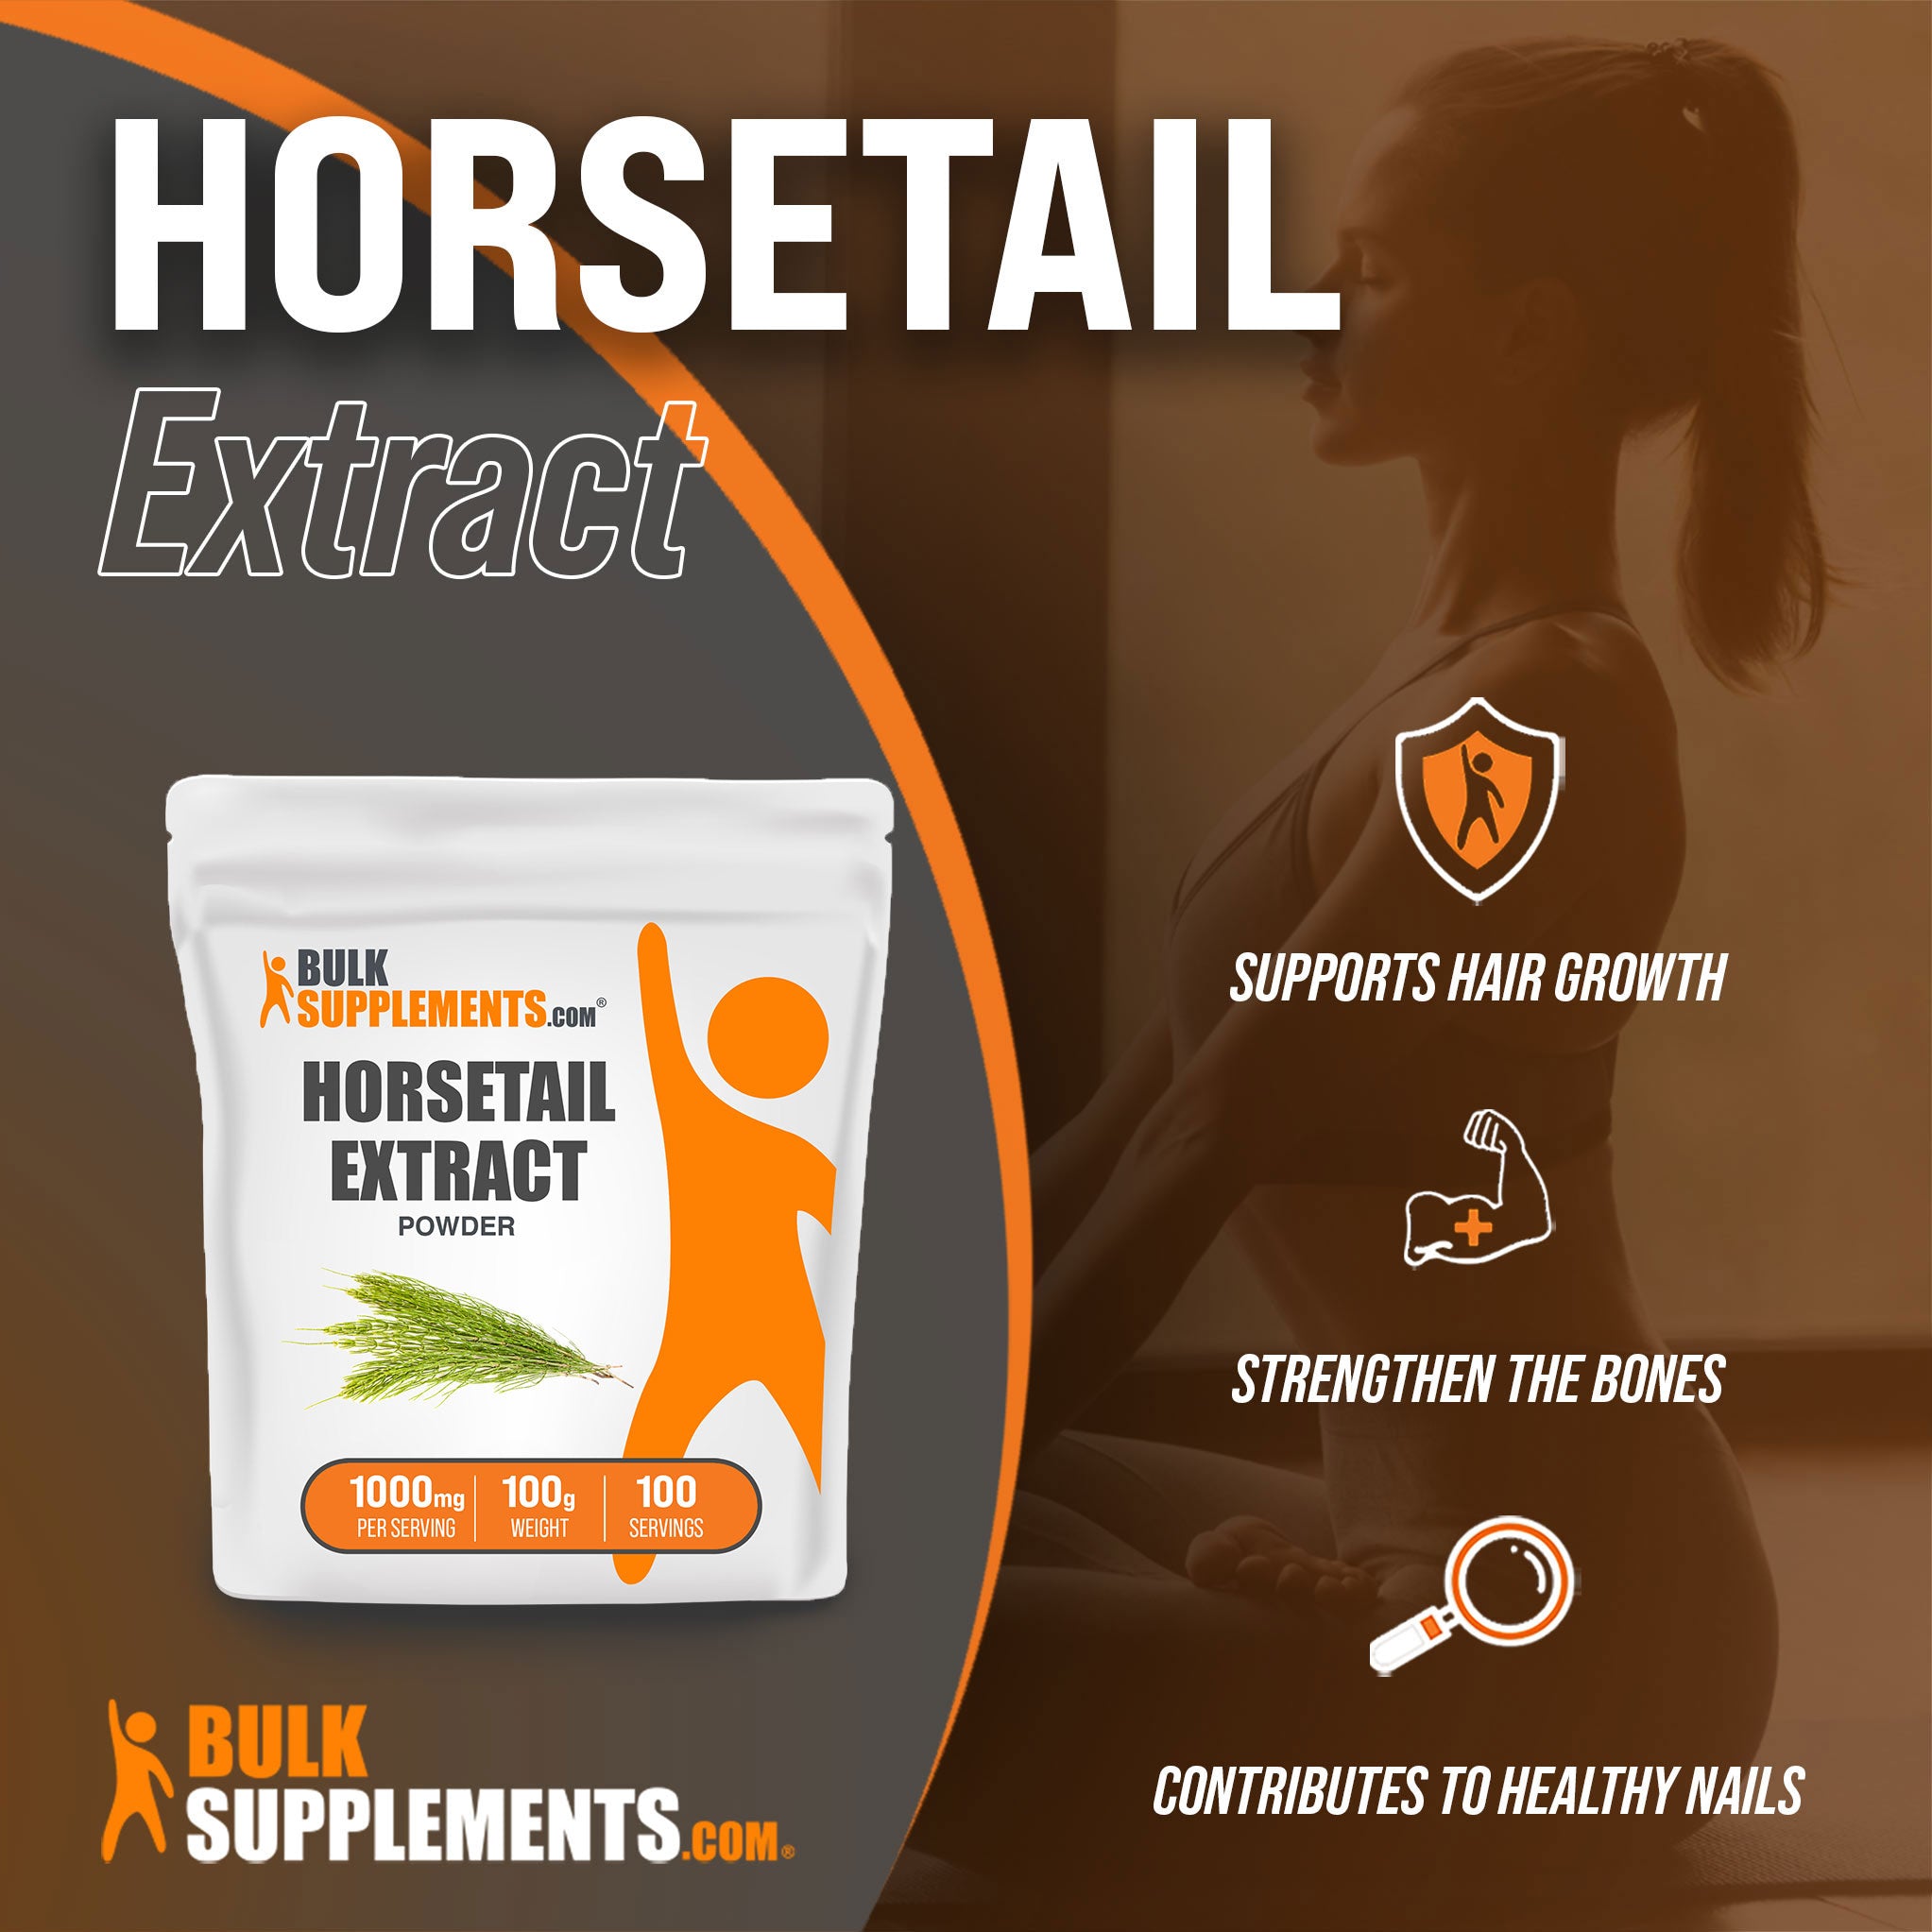 Benefits of Horsetail Extract; supports hair growth, strengthen the bones, contributes to healthy nails